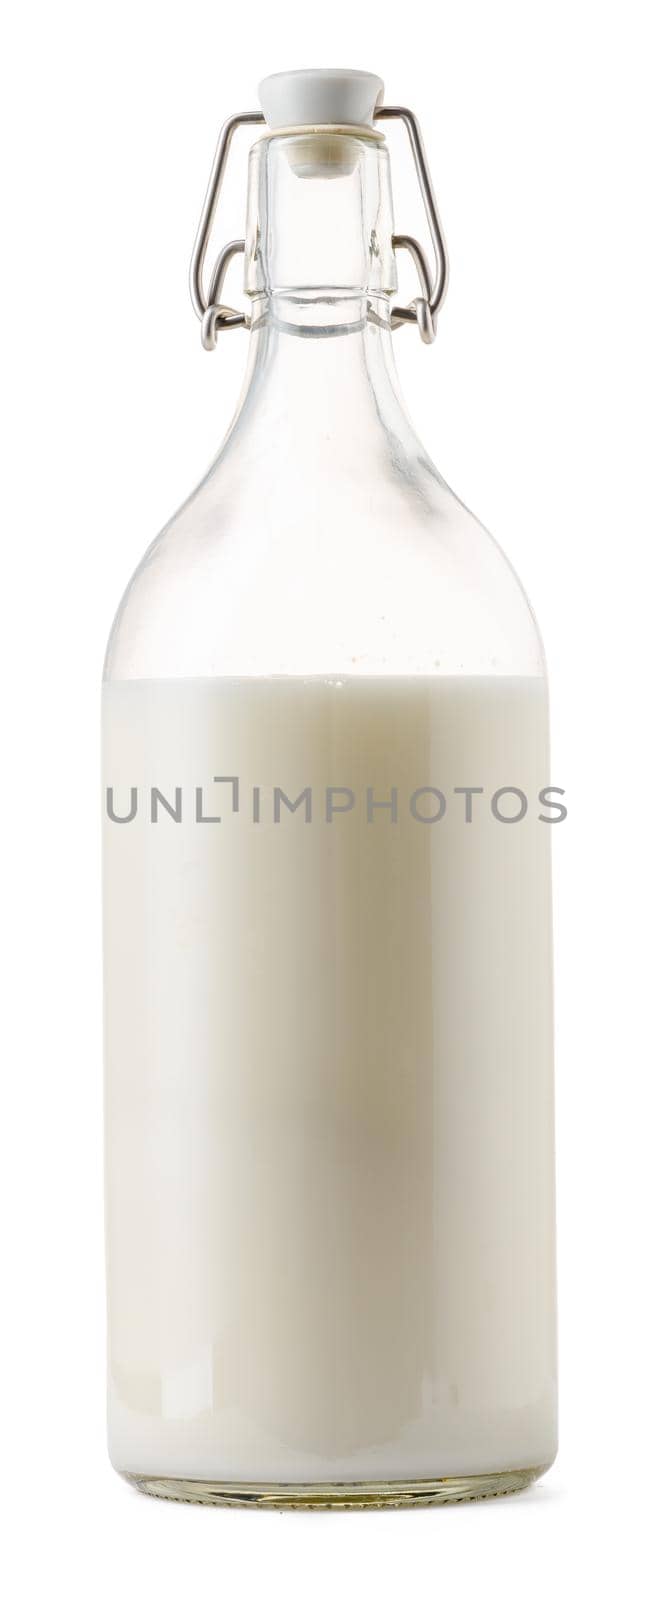 Closed glass milk bottle isolated on white background close up